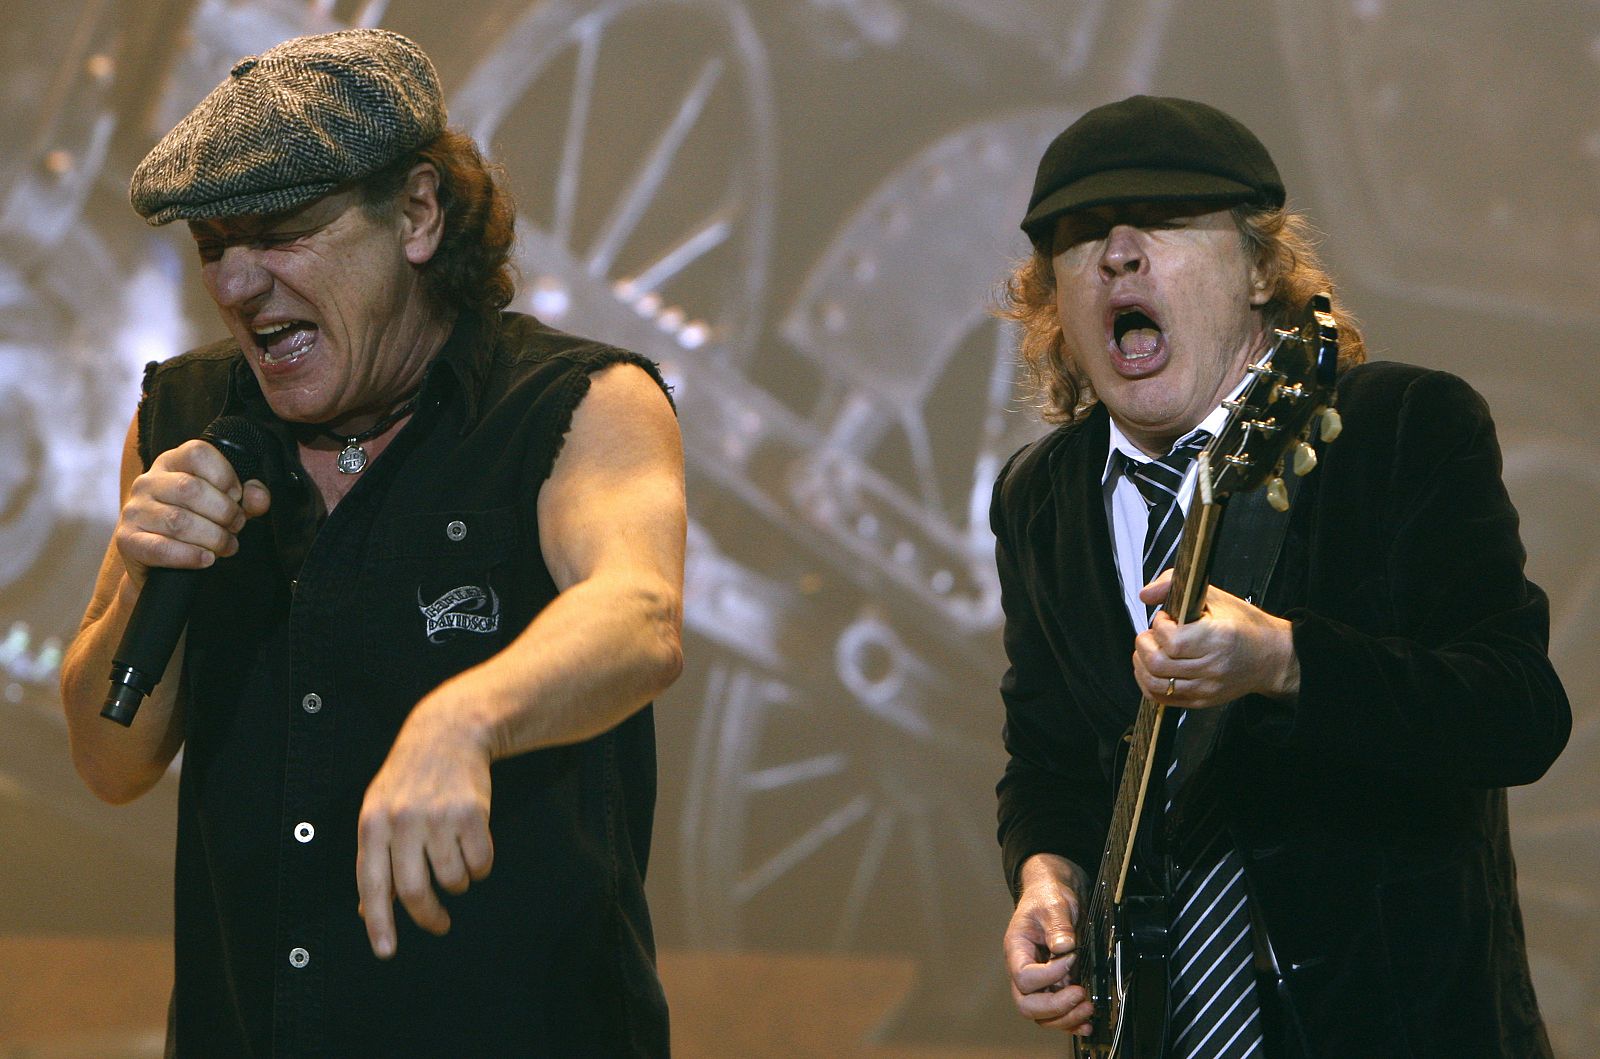 AC/DC's Johnson and Young perform in London